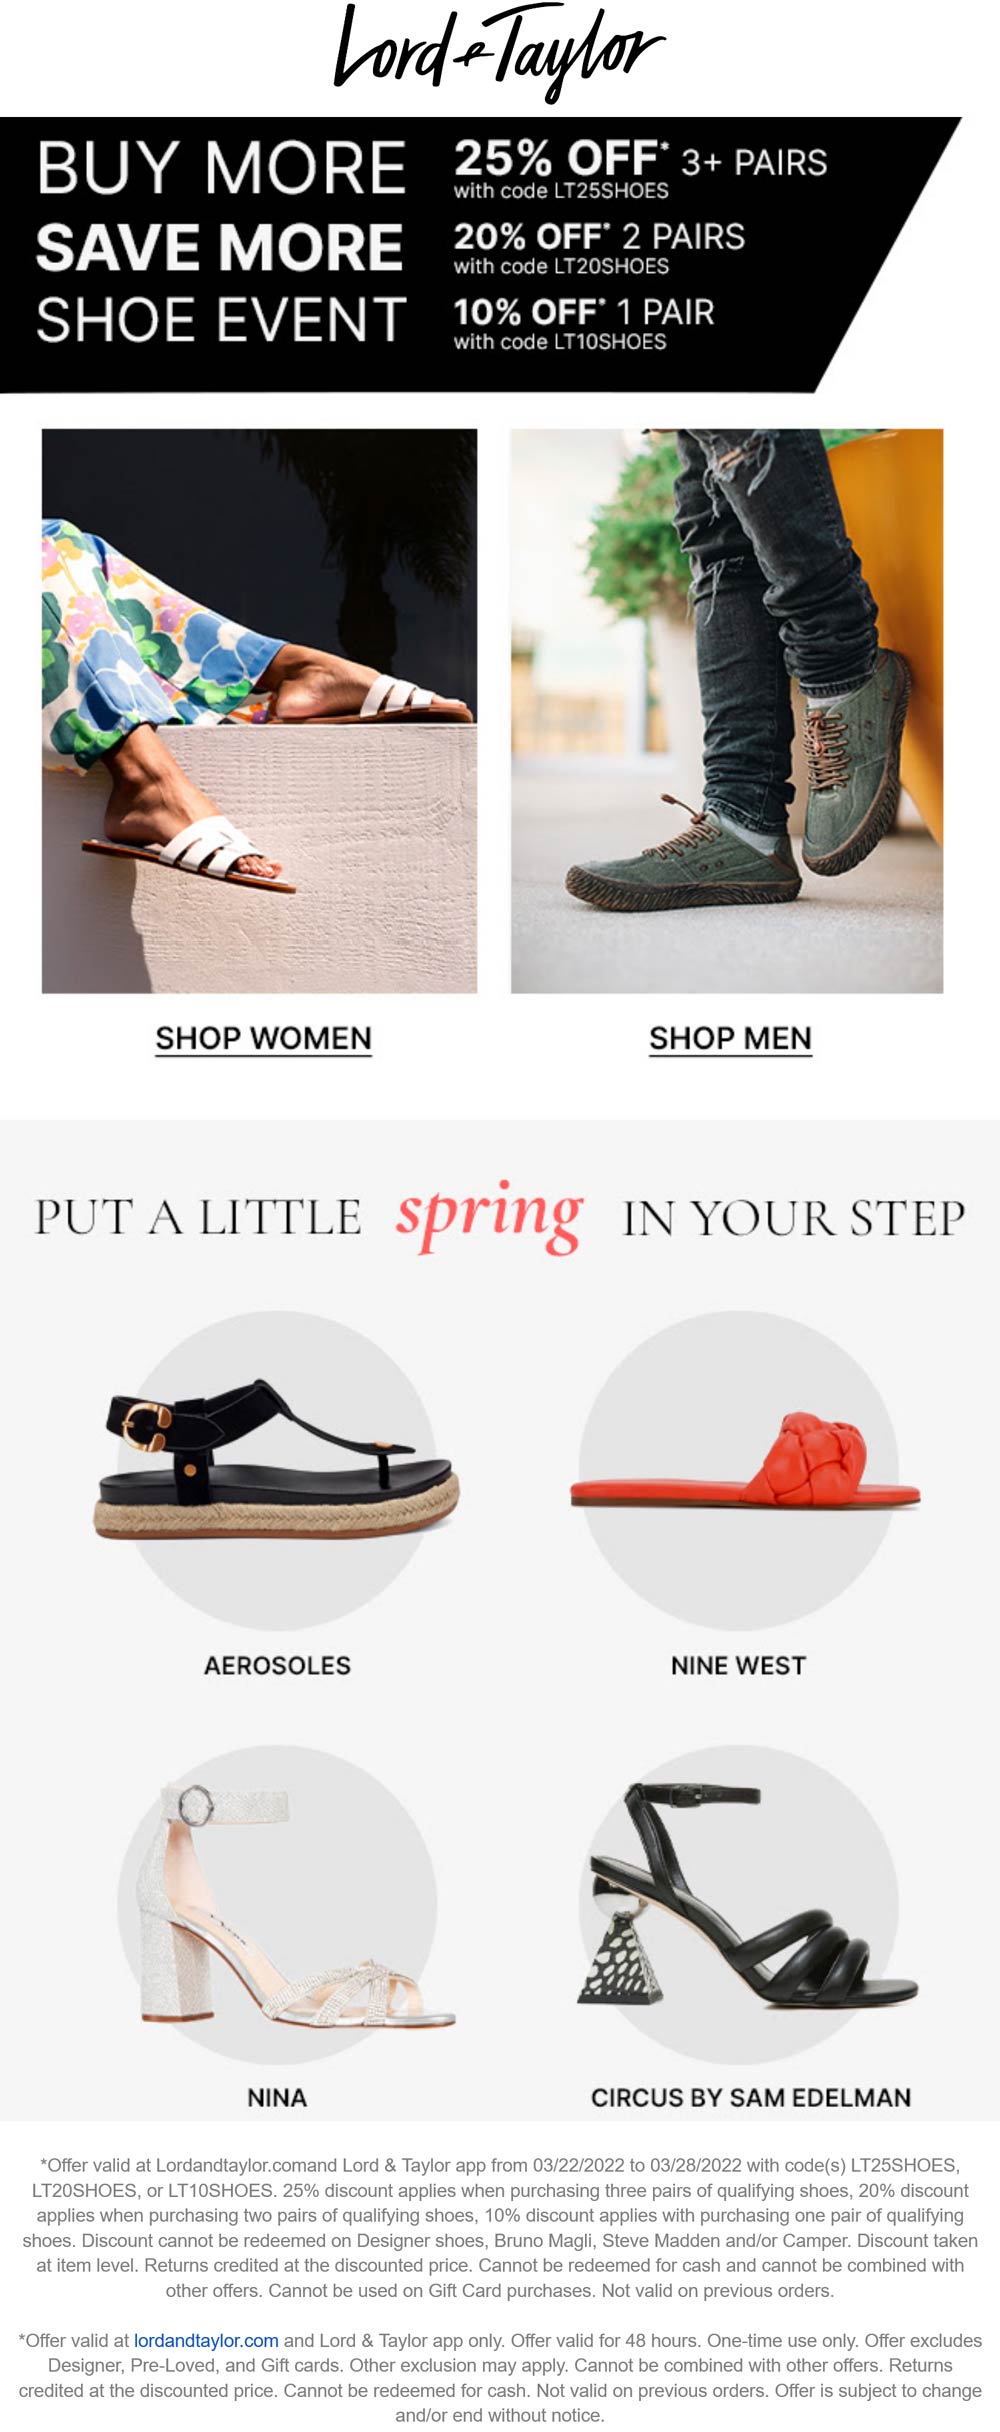 Lord & Taylor stores Coupon  10-25% off shoes at Lord & Taylor via promo code LT20SHOES #lordtaylor 